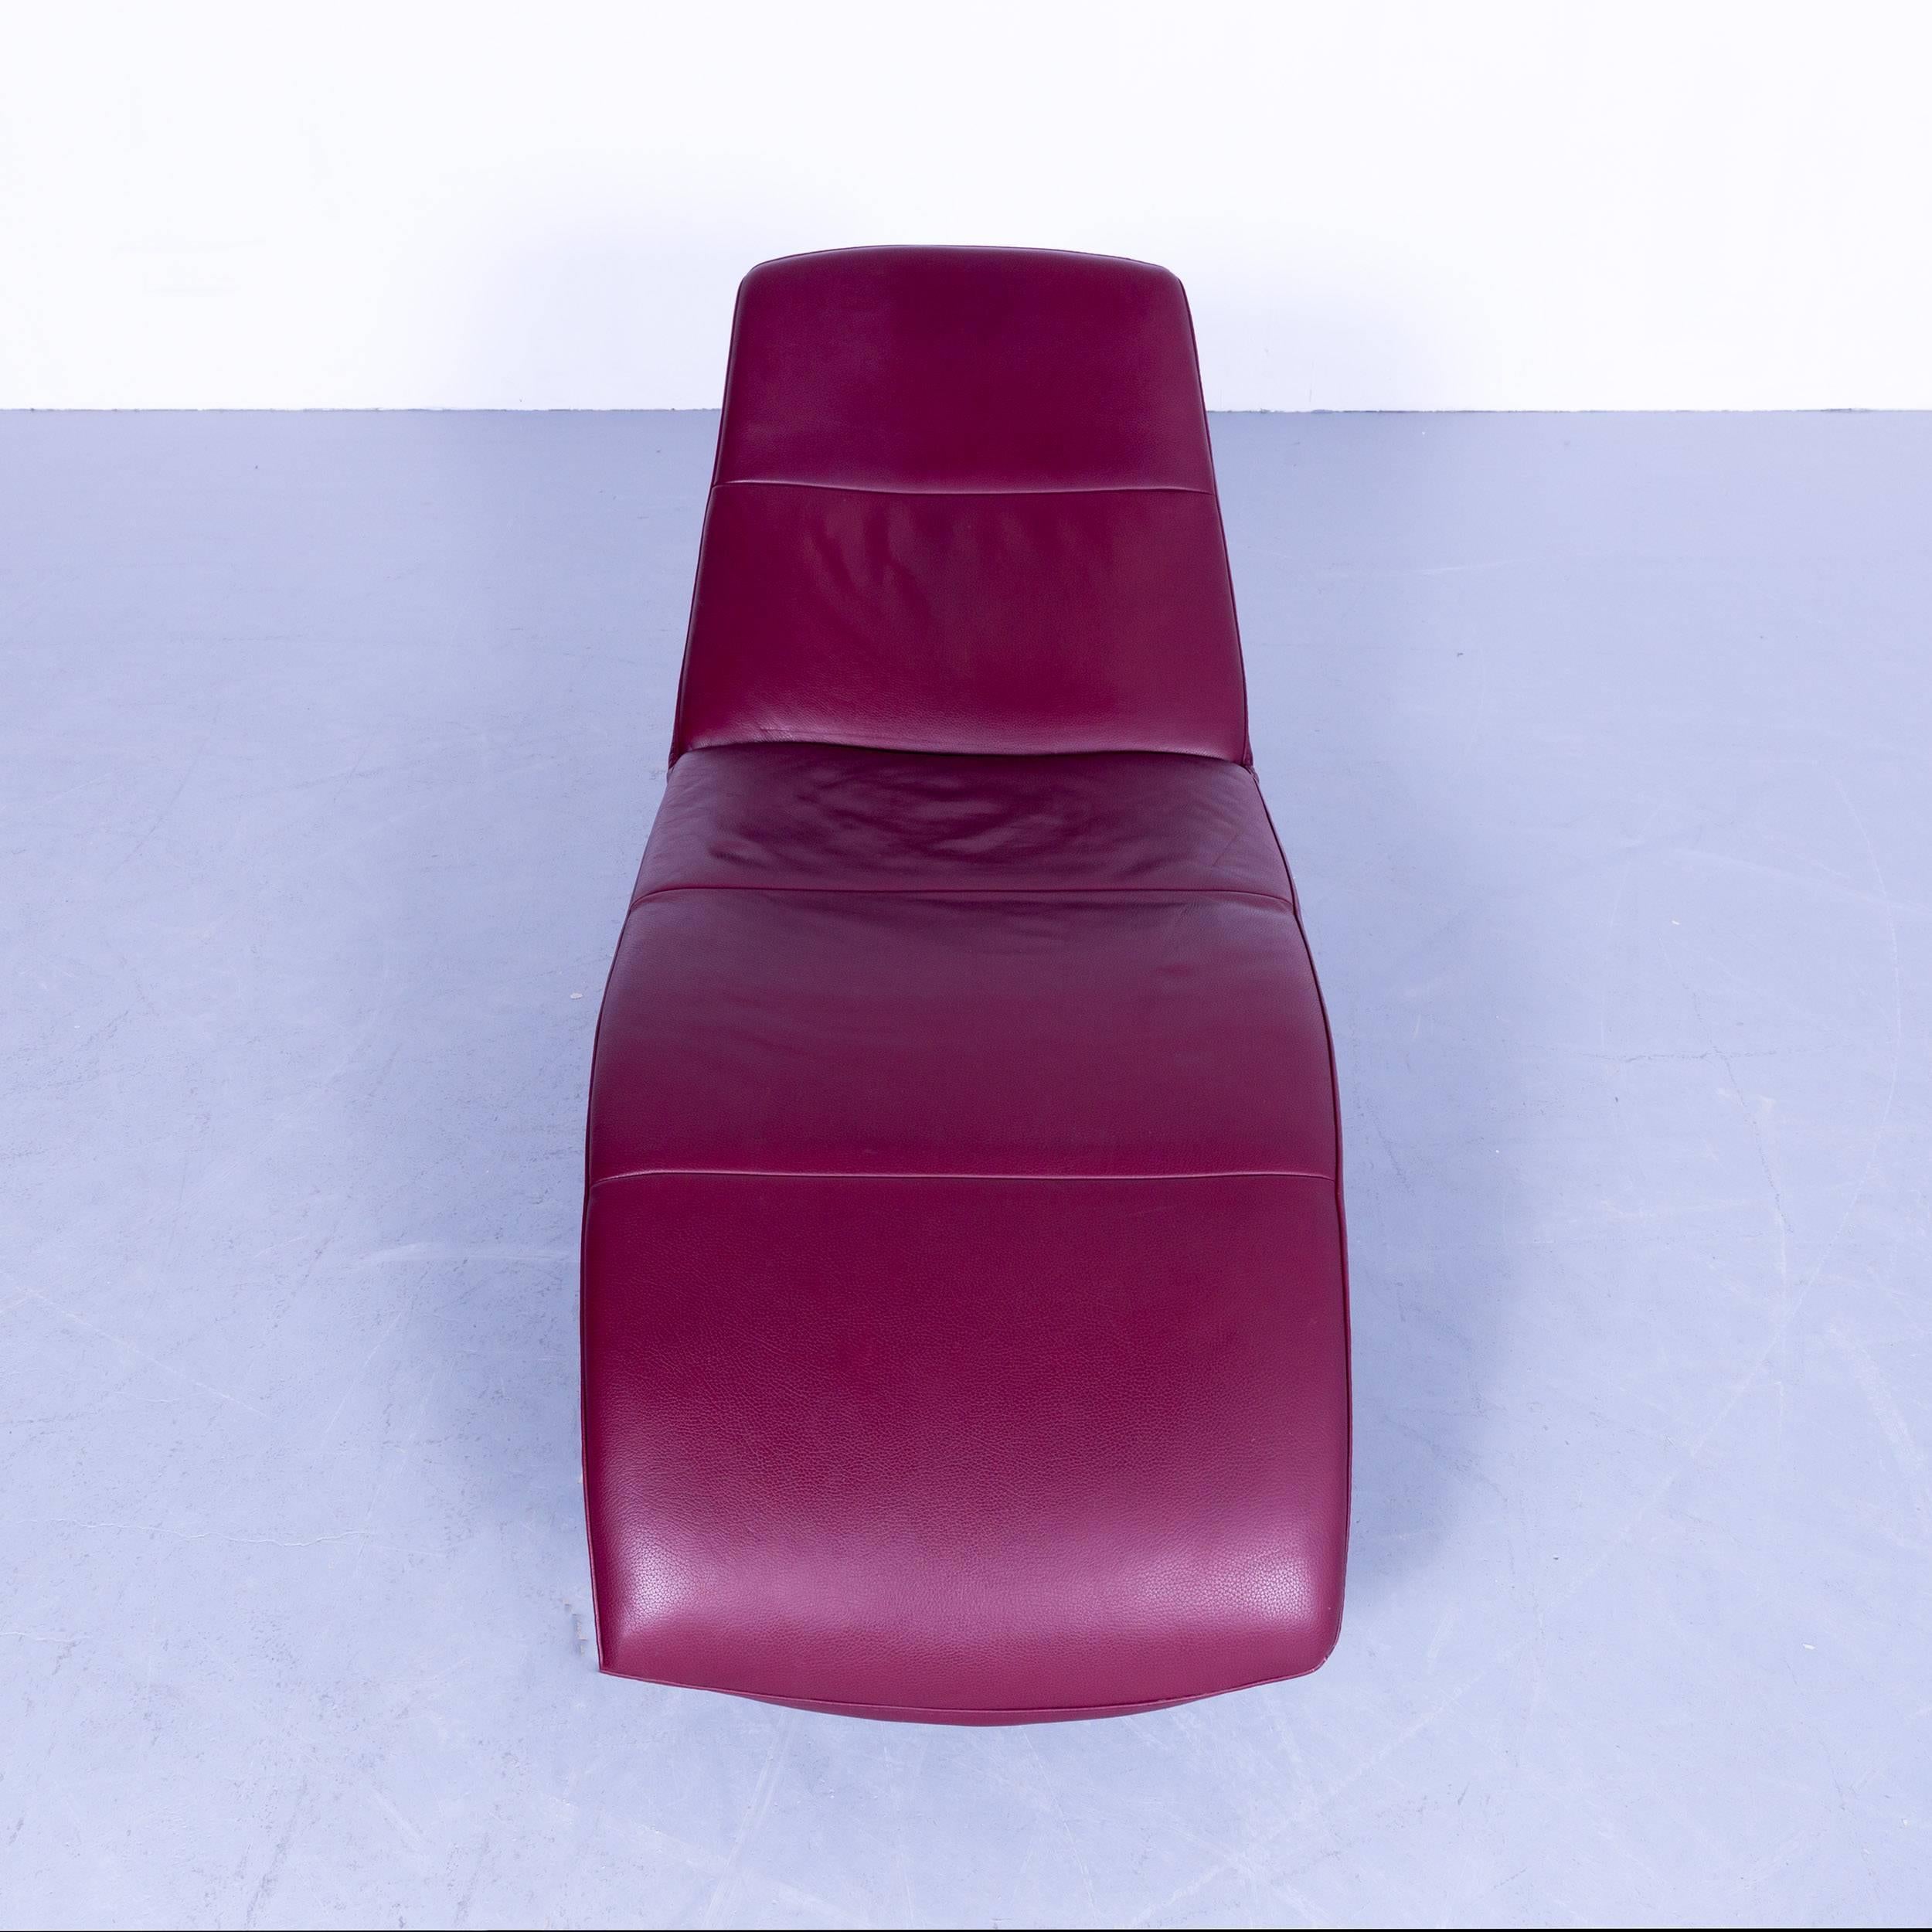 Ewald Schillig Slice daybed Designer Recliner Chair Leather Red Bordeaux In Excellent Condition For Sale In Cologne, DE